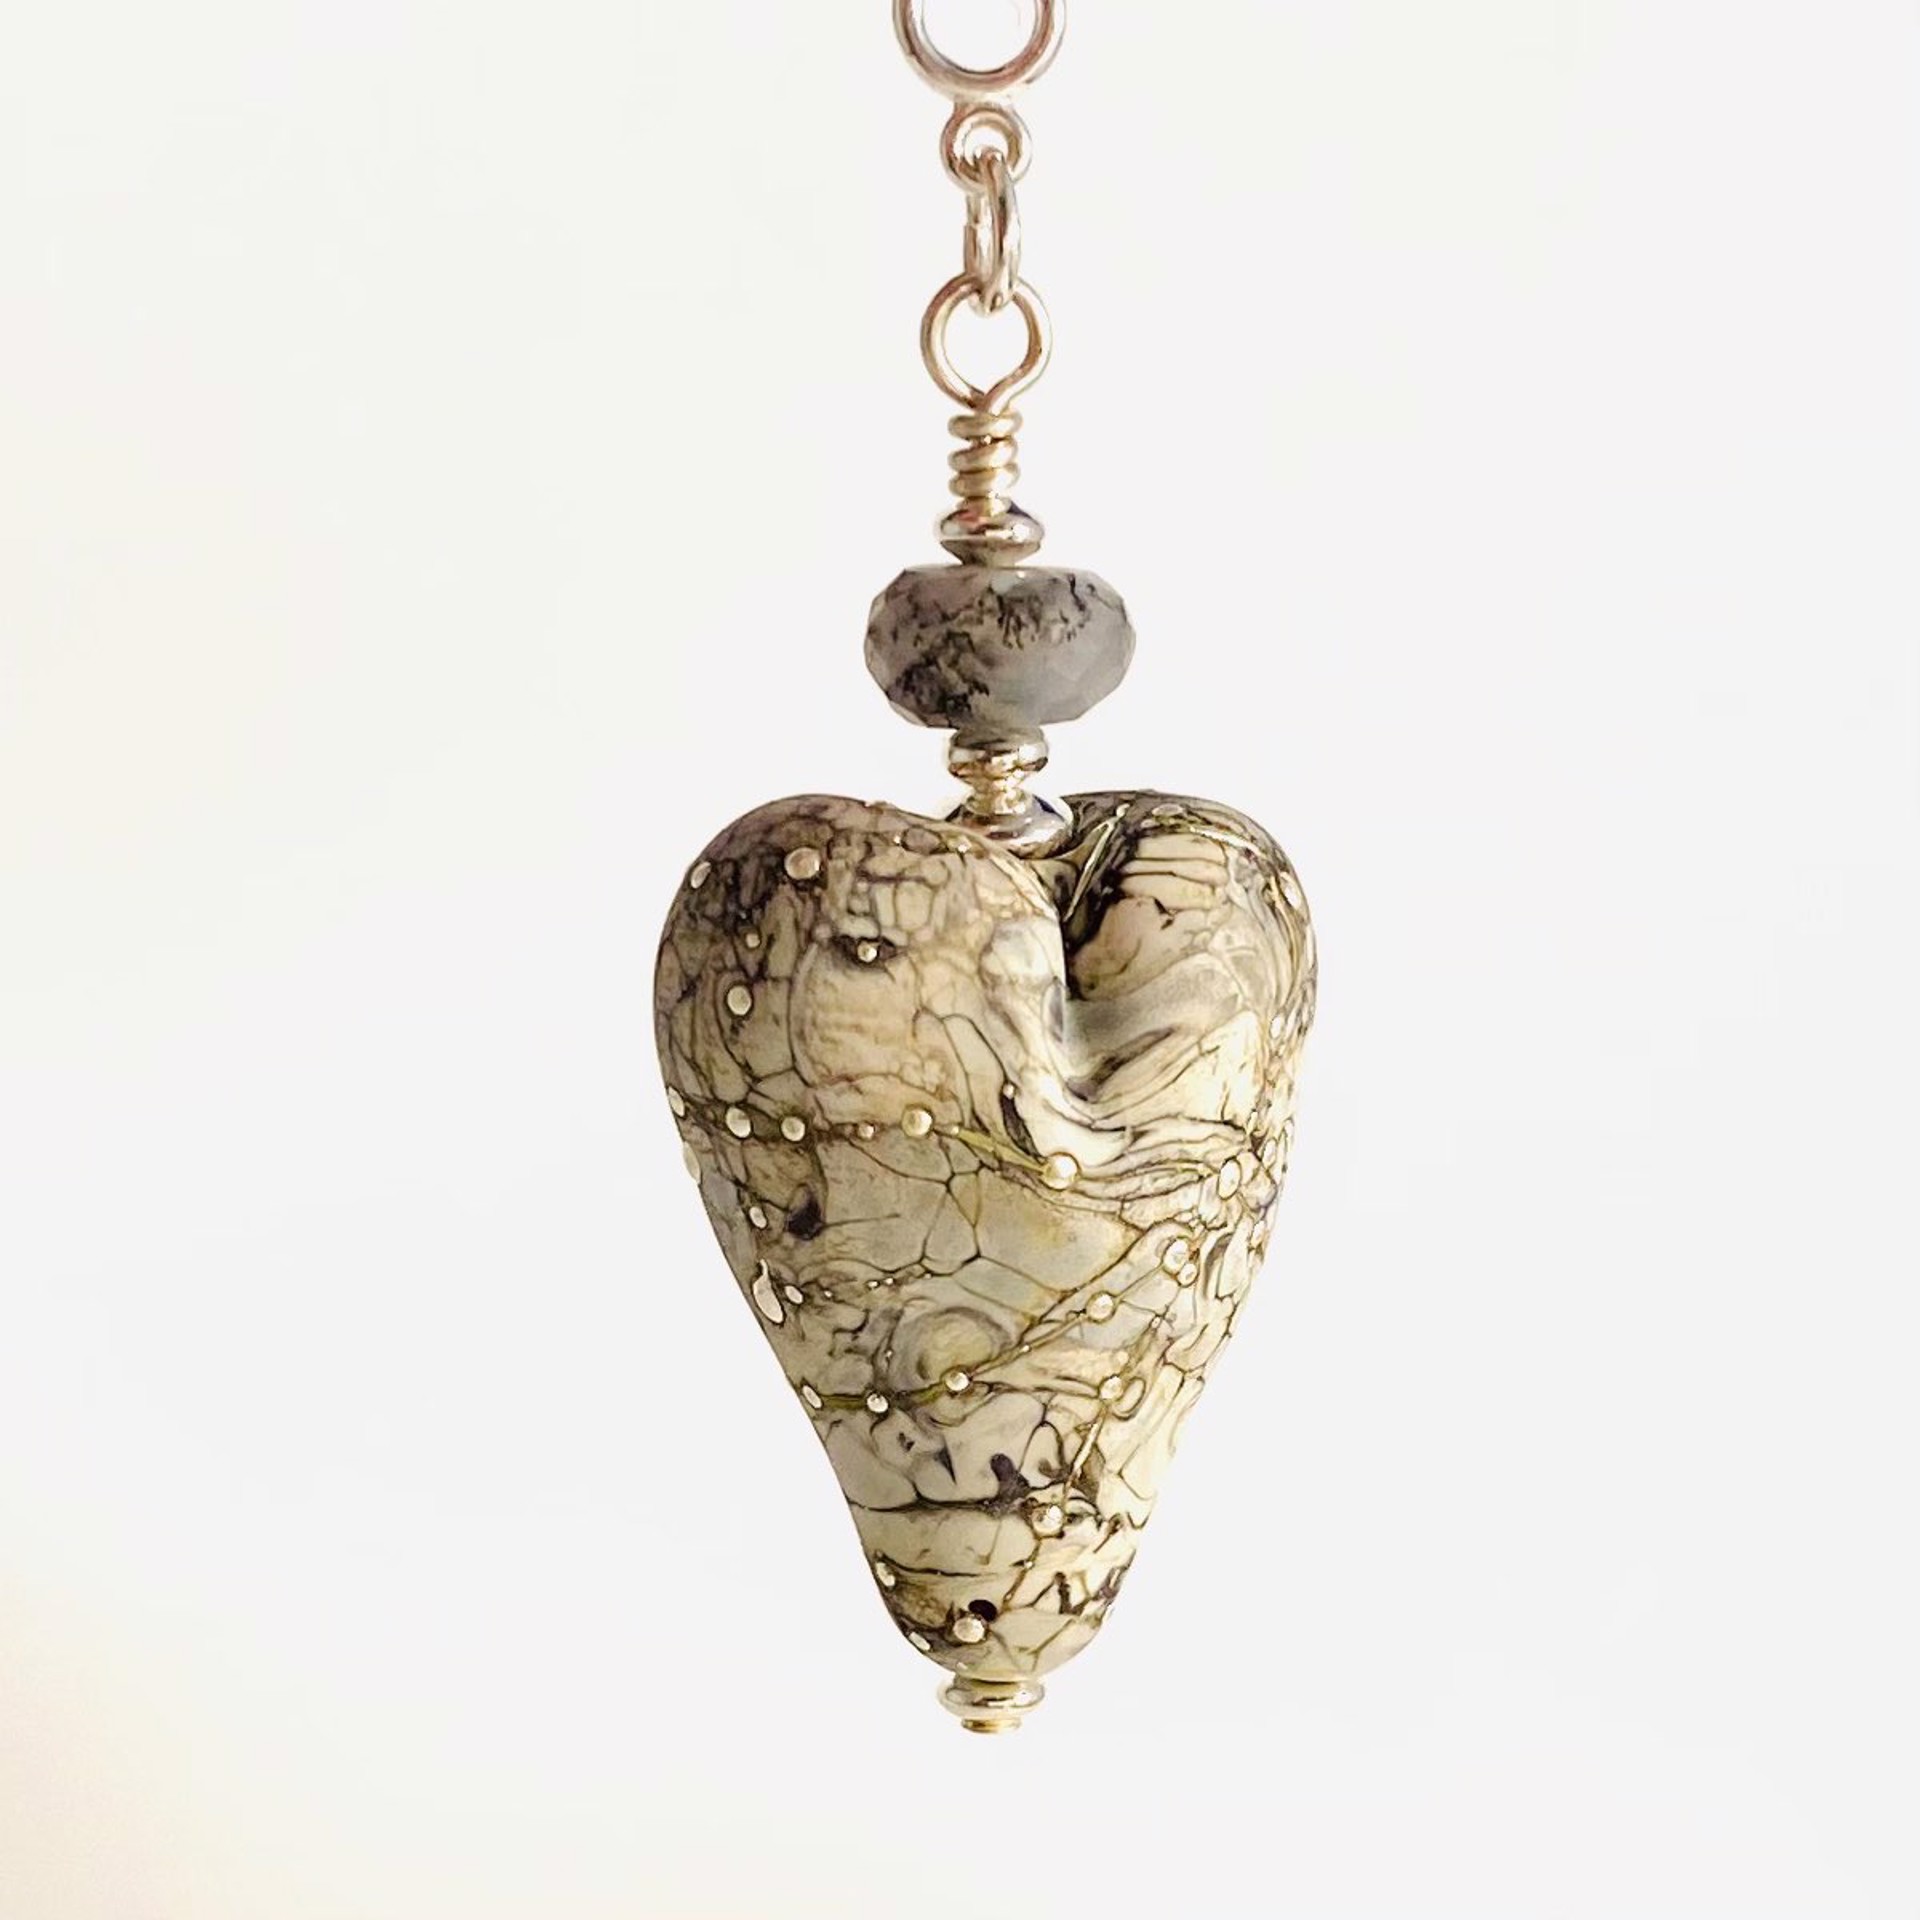 "Stone" Look Shards, Silver Foil Heart Charm LS22-84 by Linda Sacra